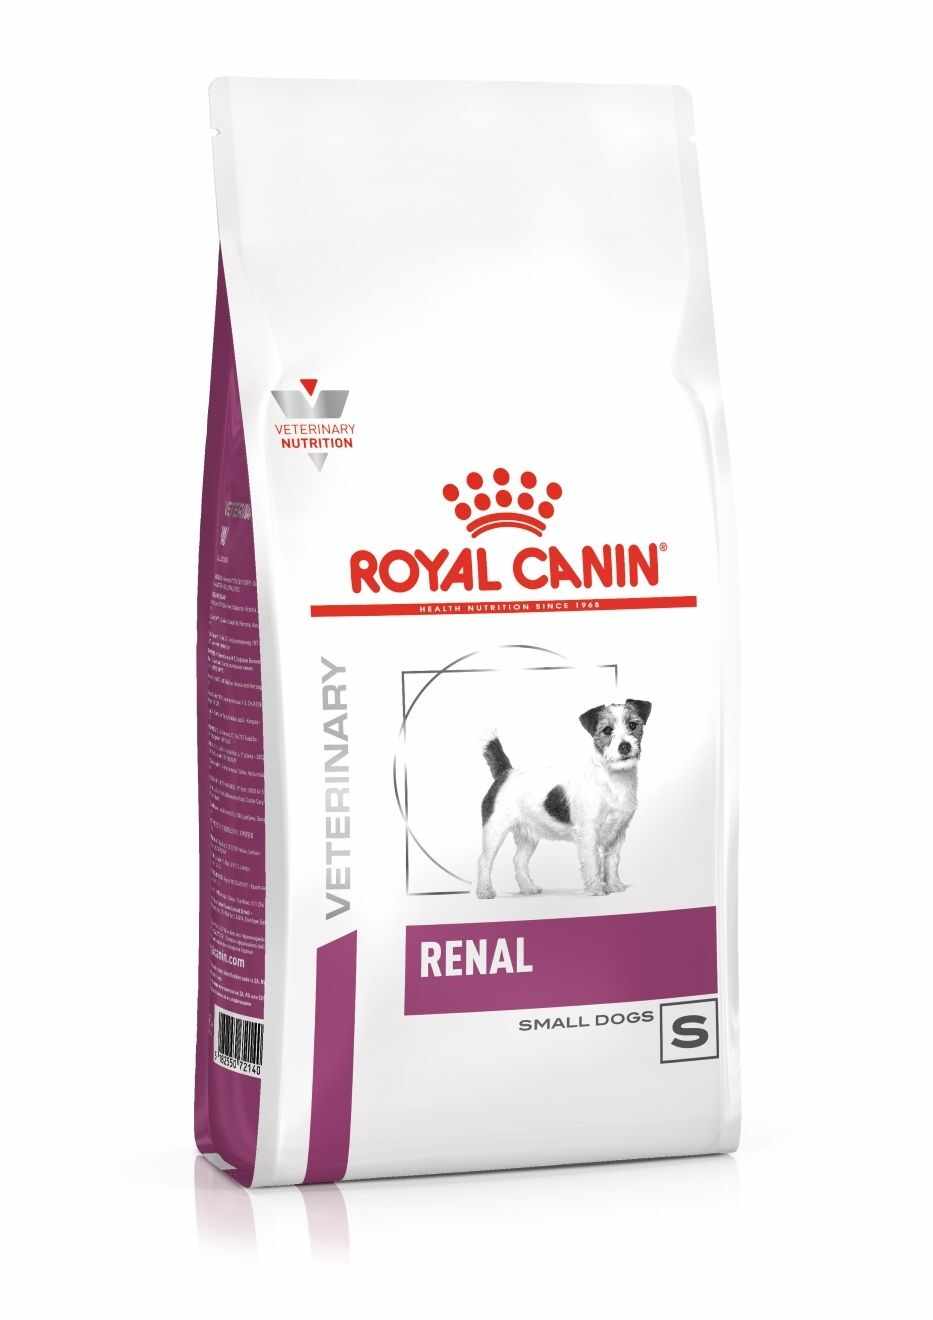 Royal Canin Renal Small Dog Dry, 3.5 kg